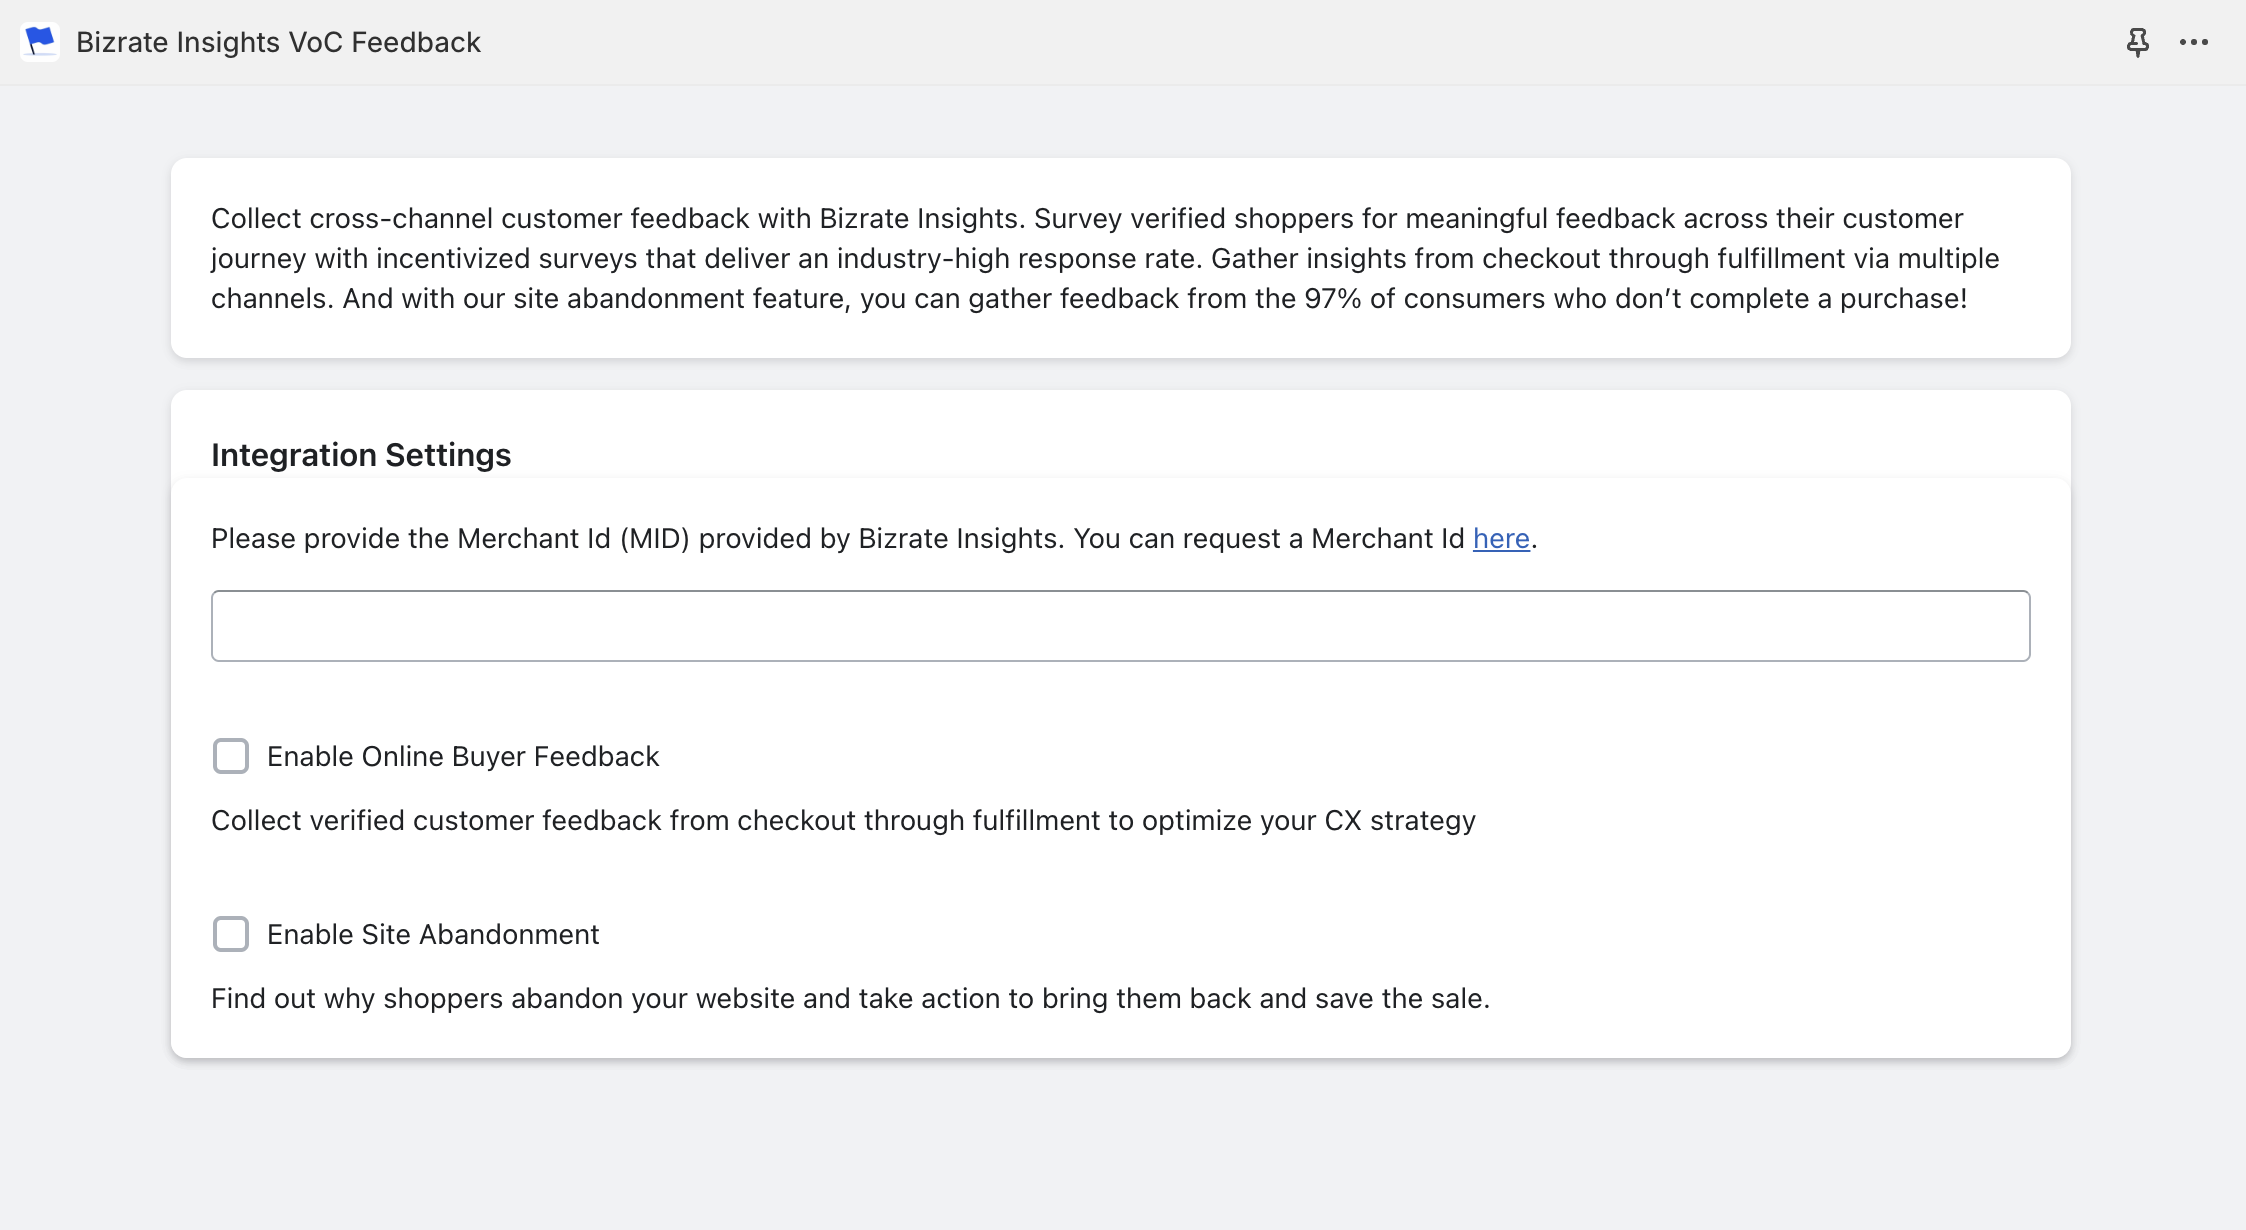 Image of the account creation portion of the Bizrate Insights Shopify plugin